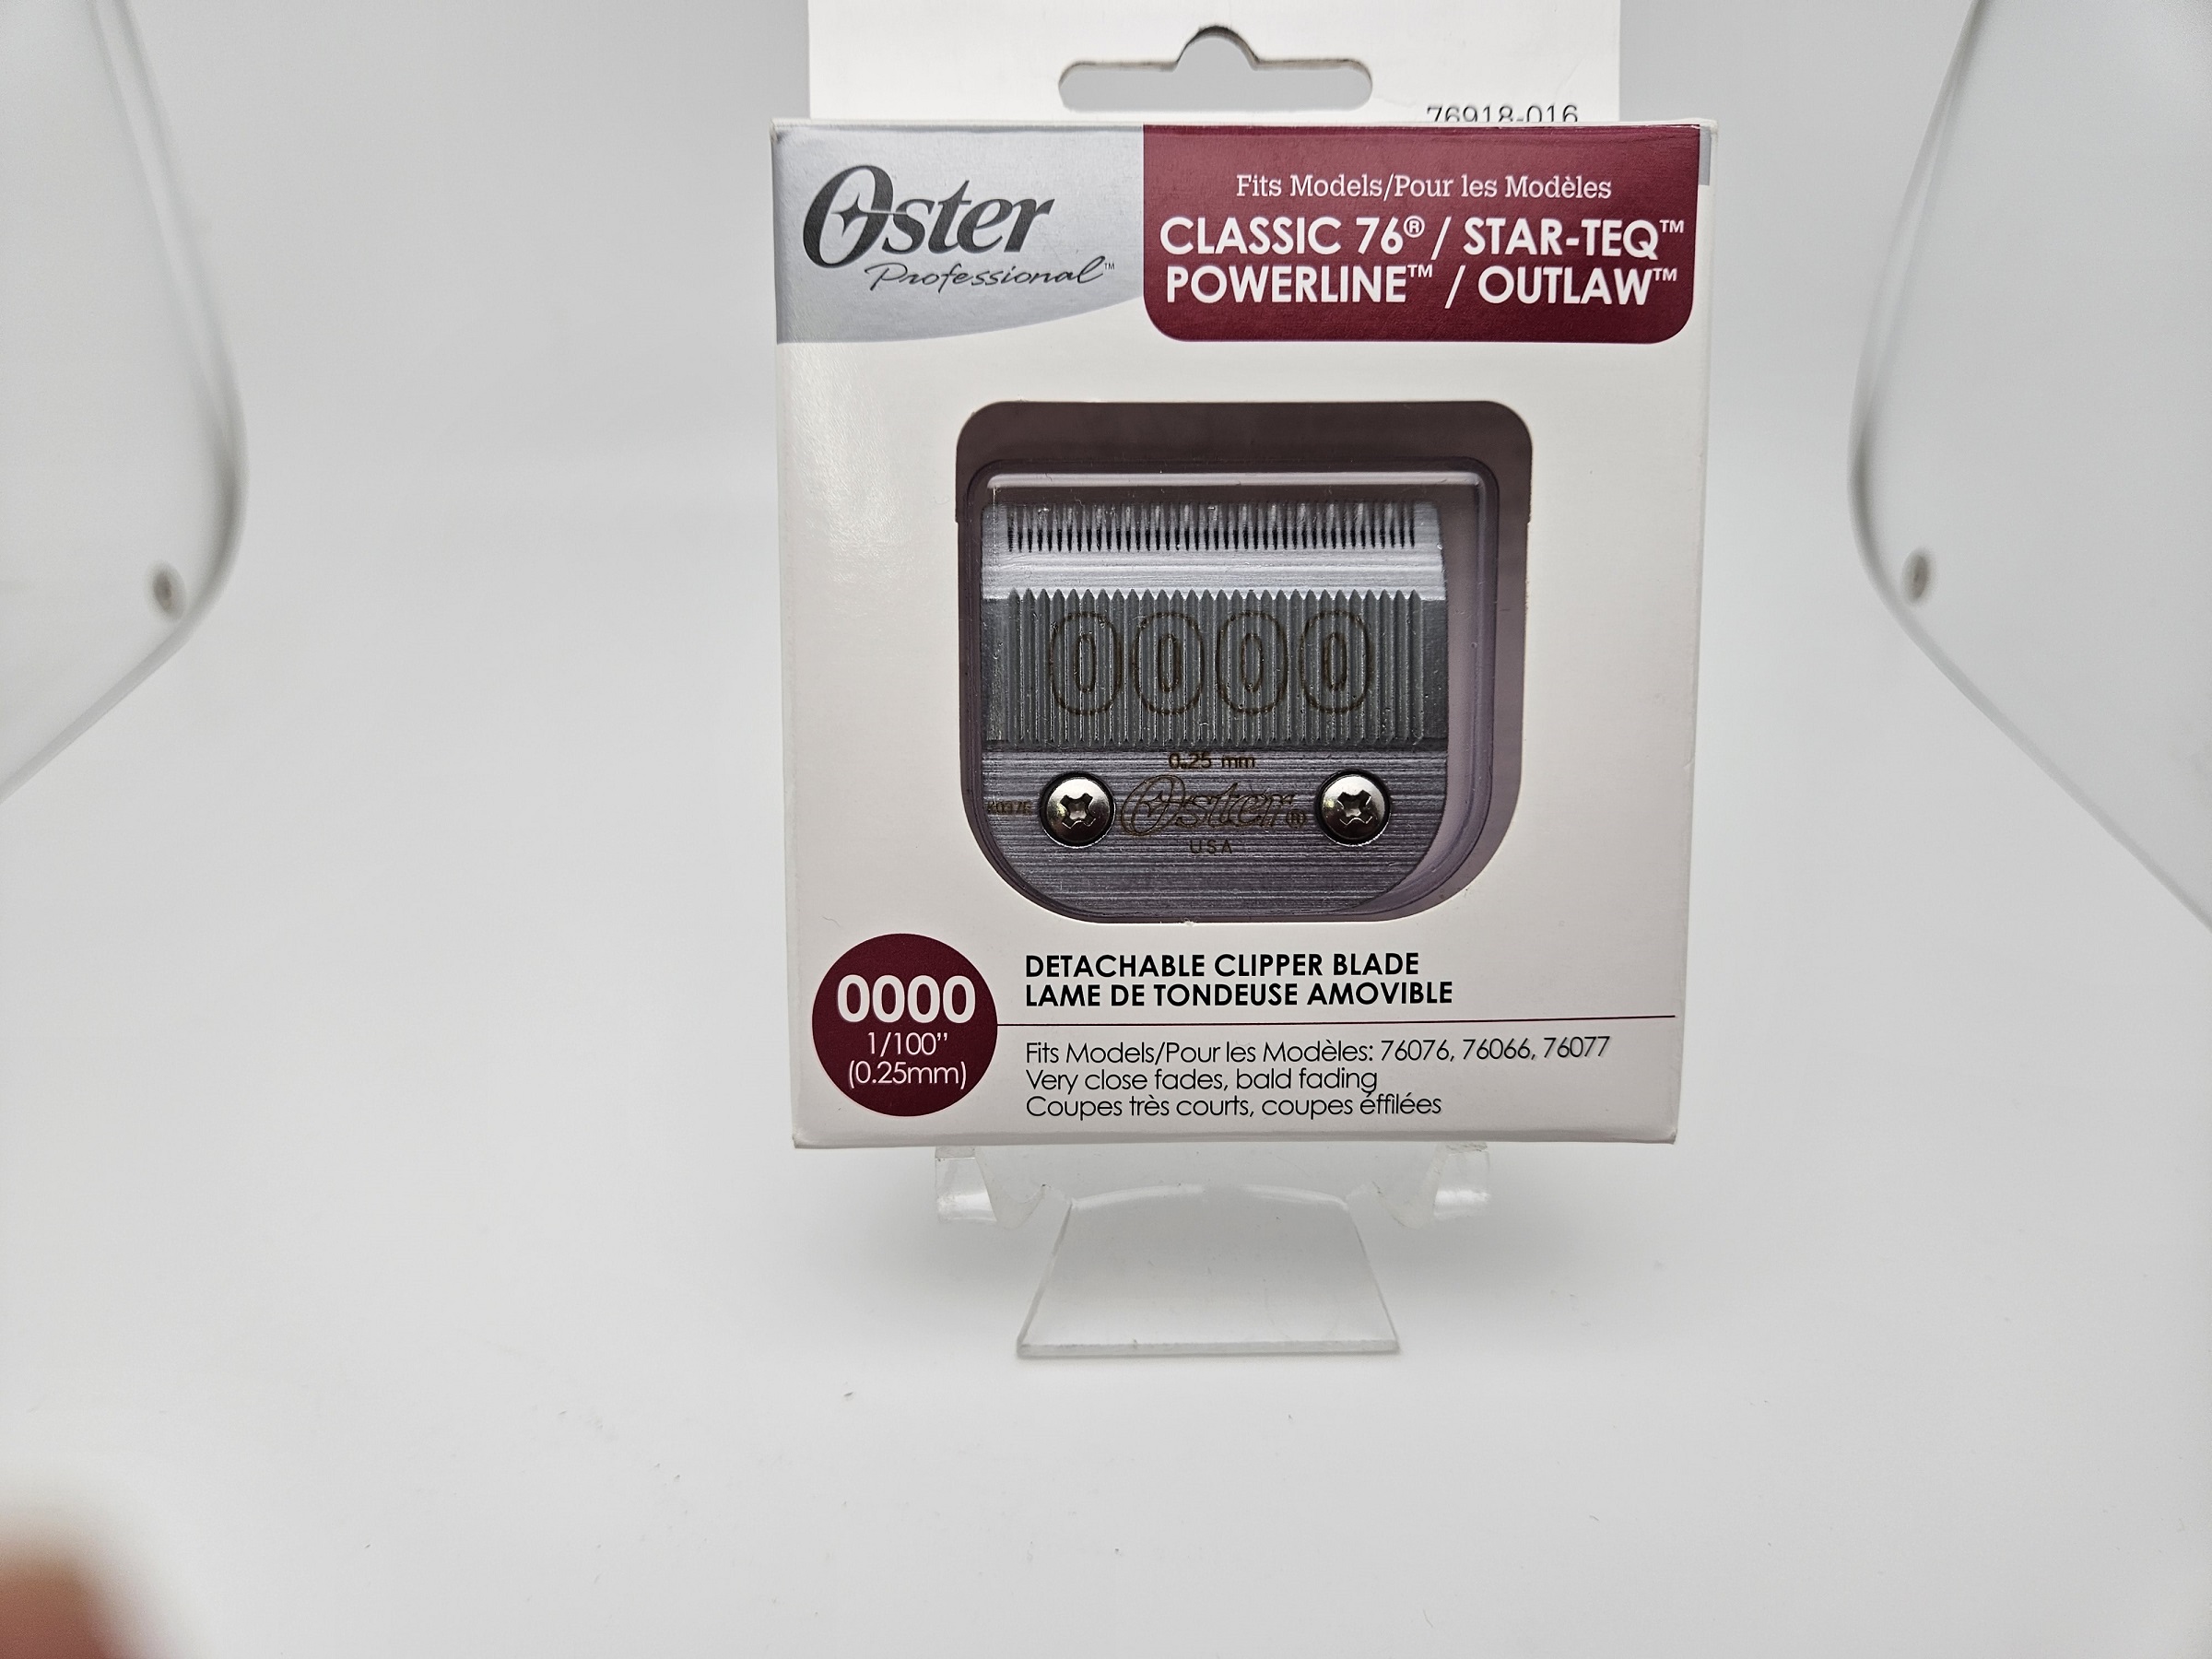 Oster 76918-016 Clipper Blade Size 0000 for Classic 76